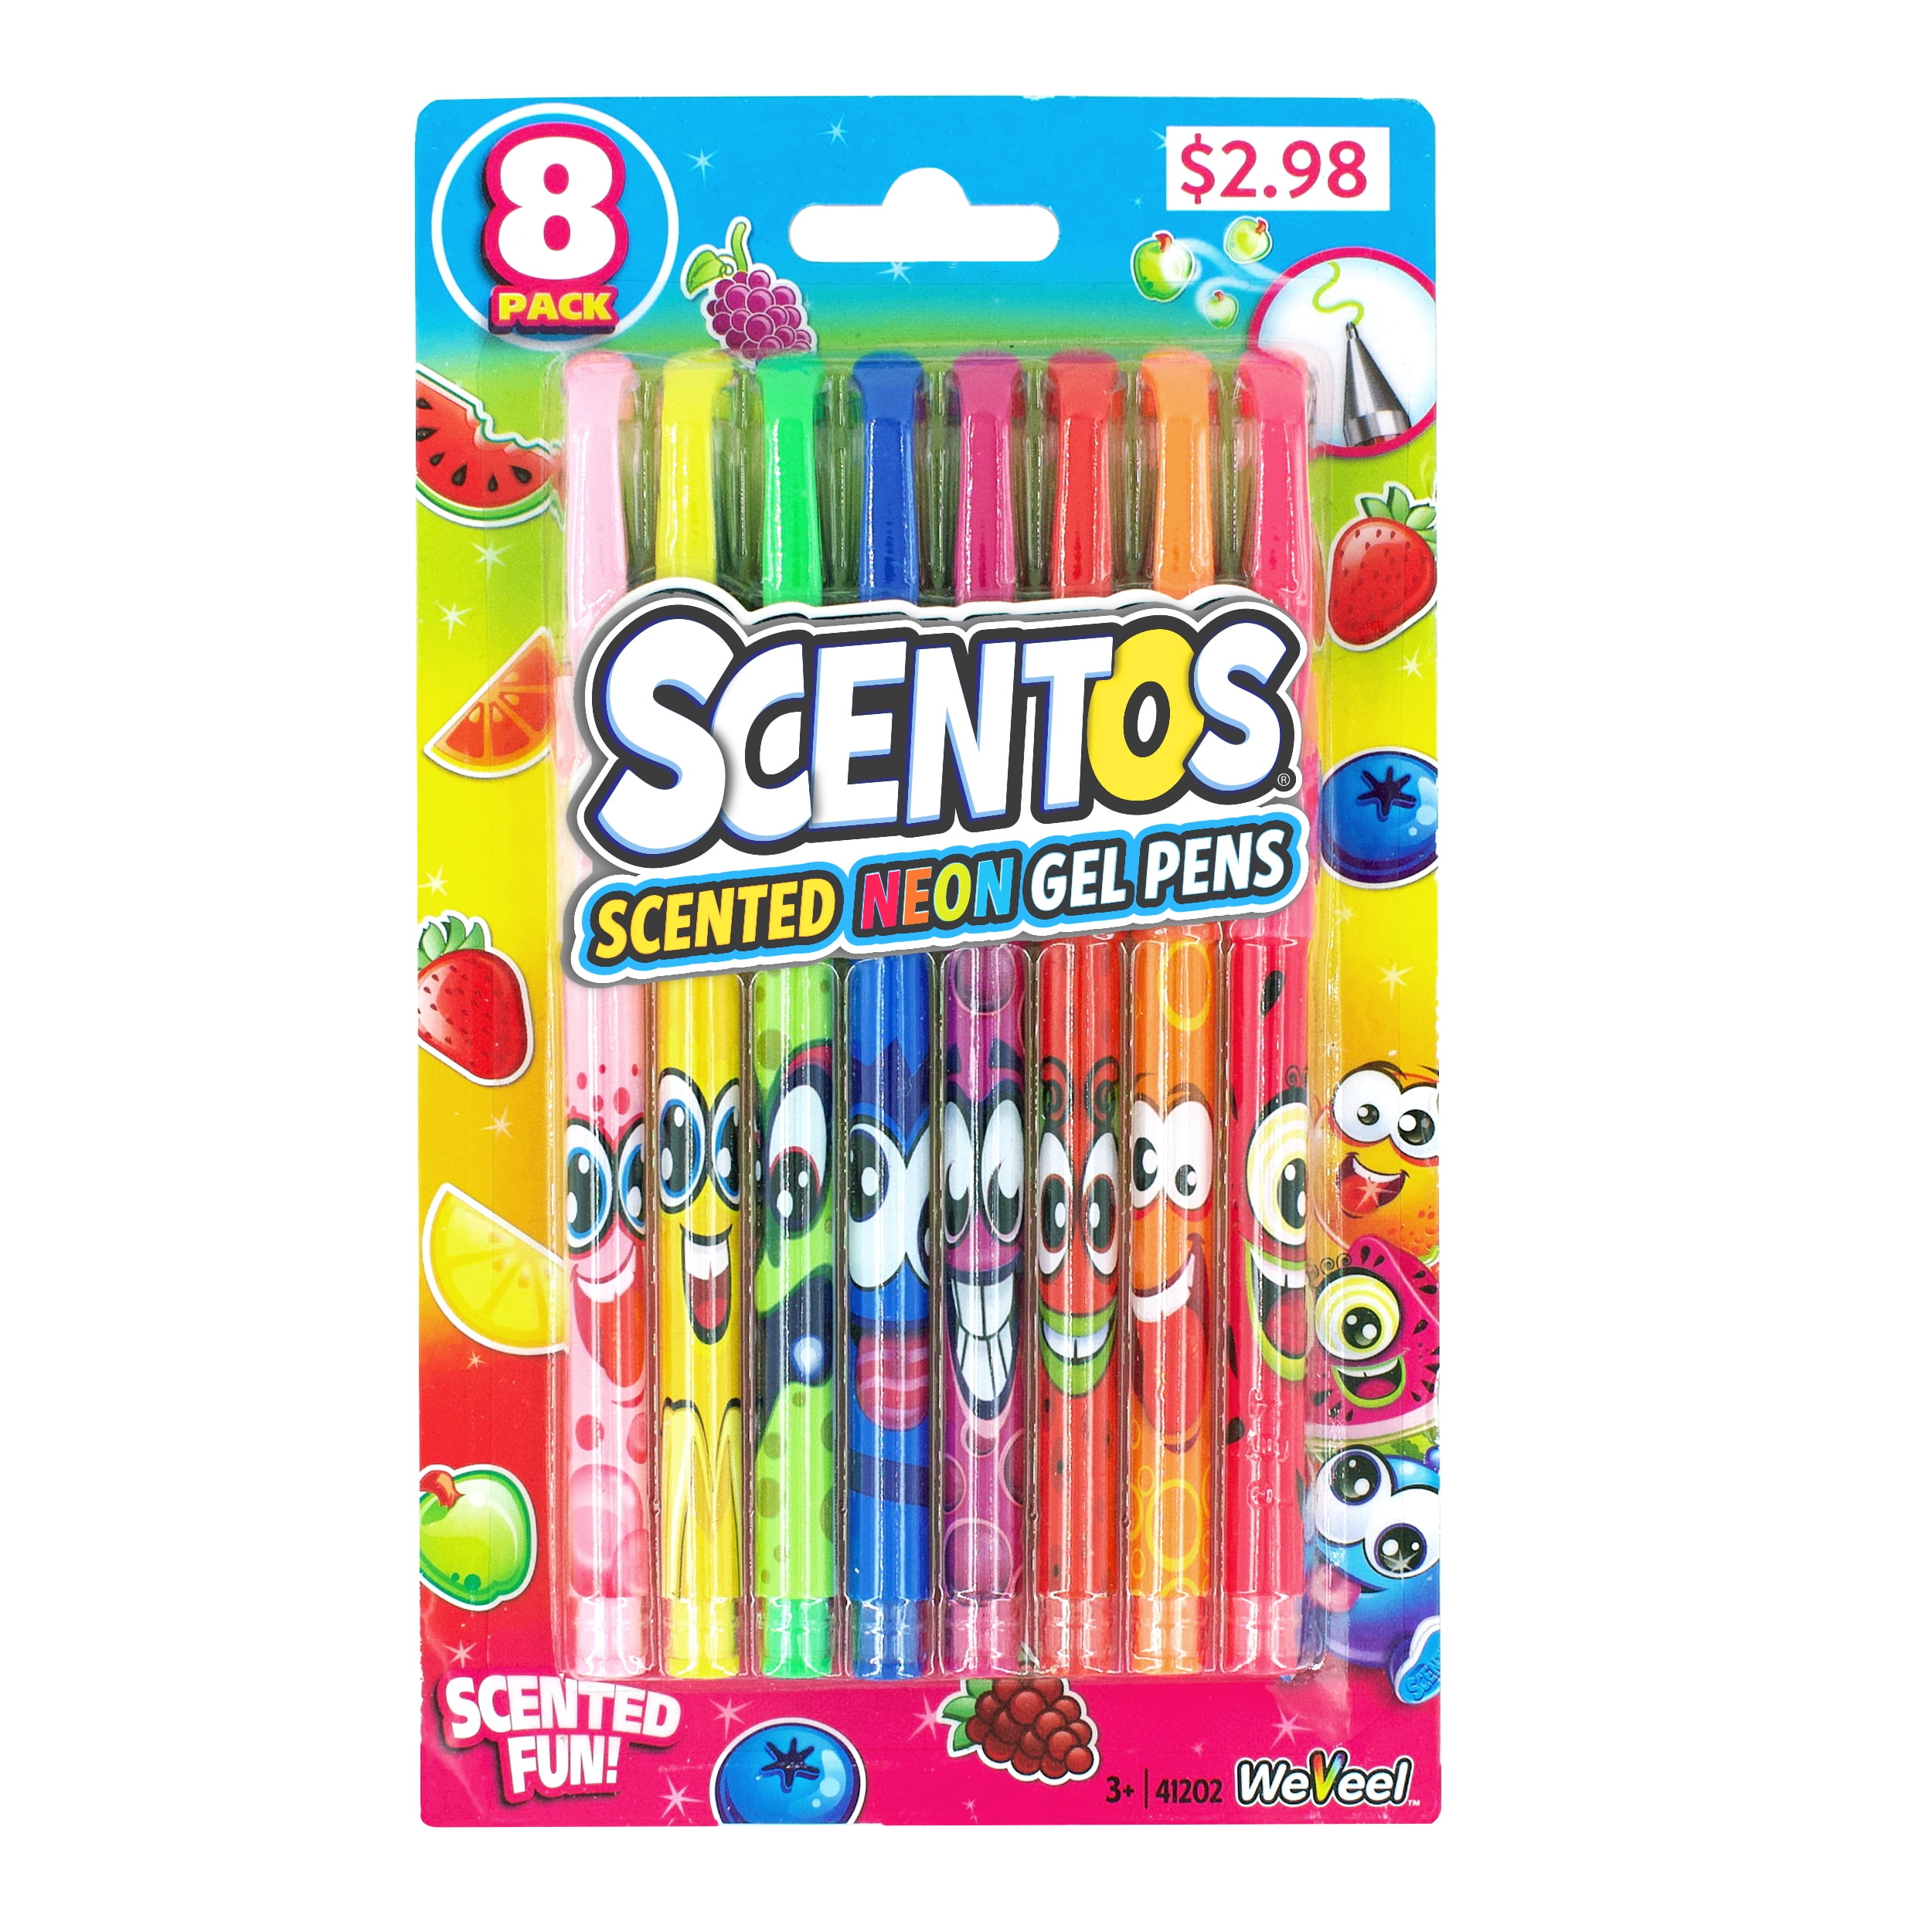 Scentos Scented Mini Pens - 20-Count - Colored Fine Point Pens for Kids or Adults in Assorted Colors & Scents - Fun for Writing & Drawing, Arts & CR